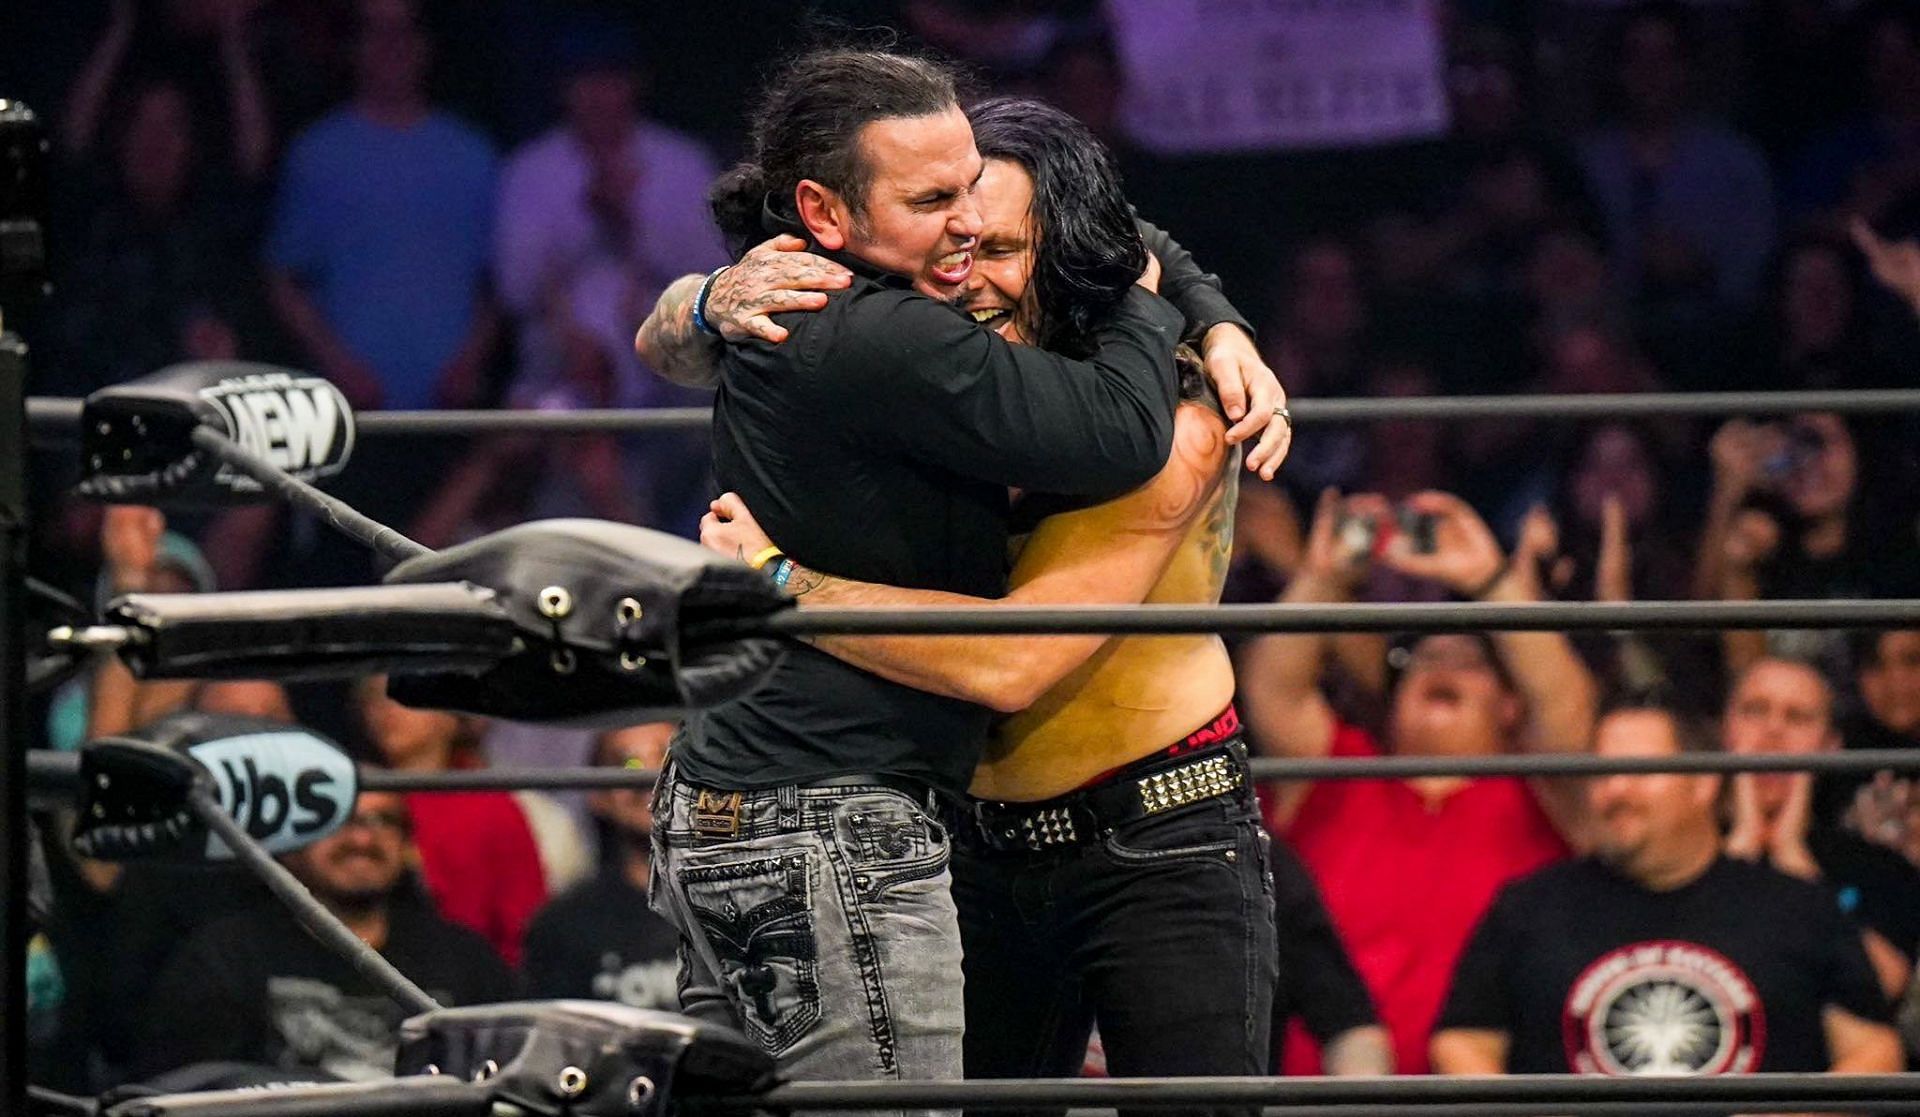 The Hardys are in All Elite Wrestling now